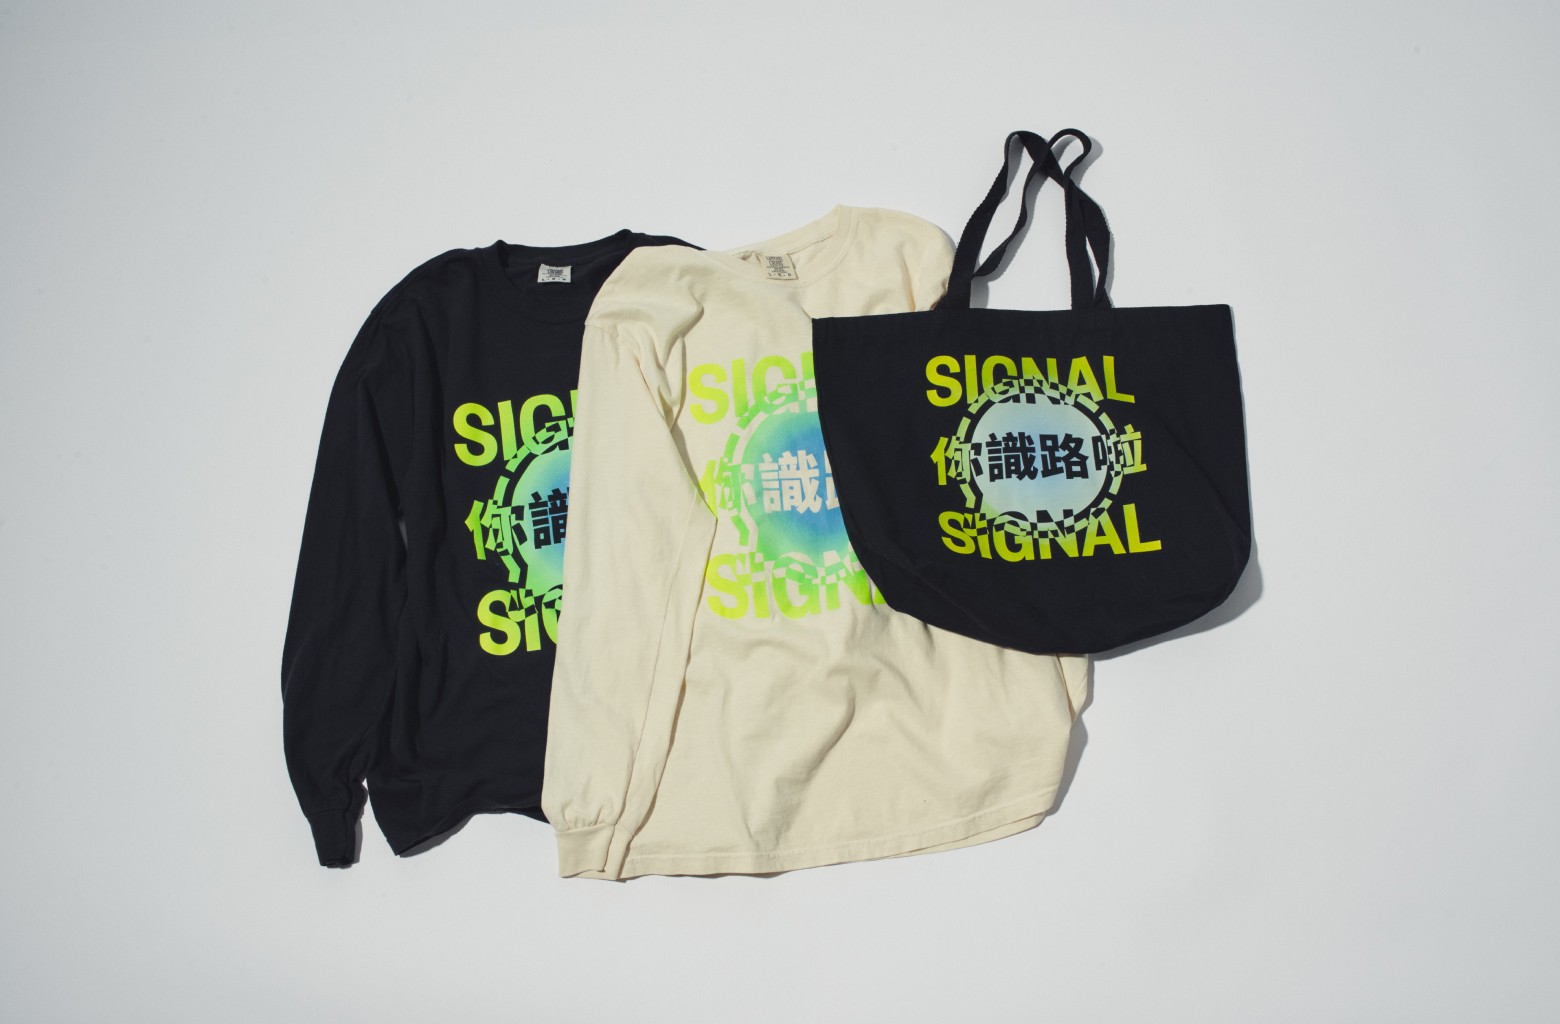 Two longsleeve shirts and a tote bag with stylized neon 99chat logo and Cantonese characters reading '你識路啦'.